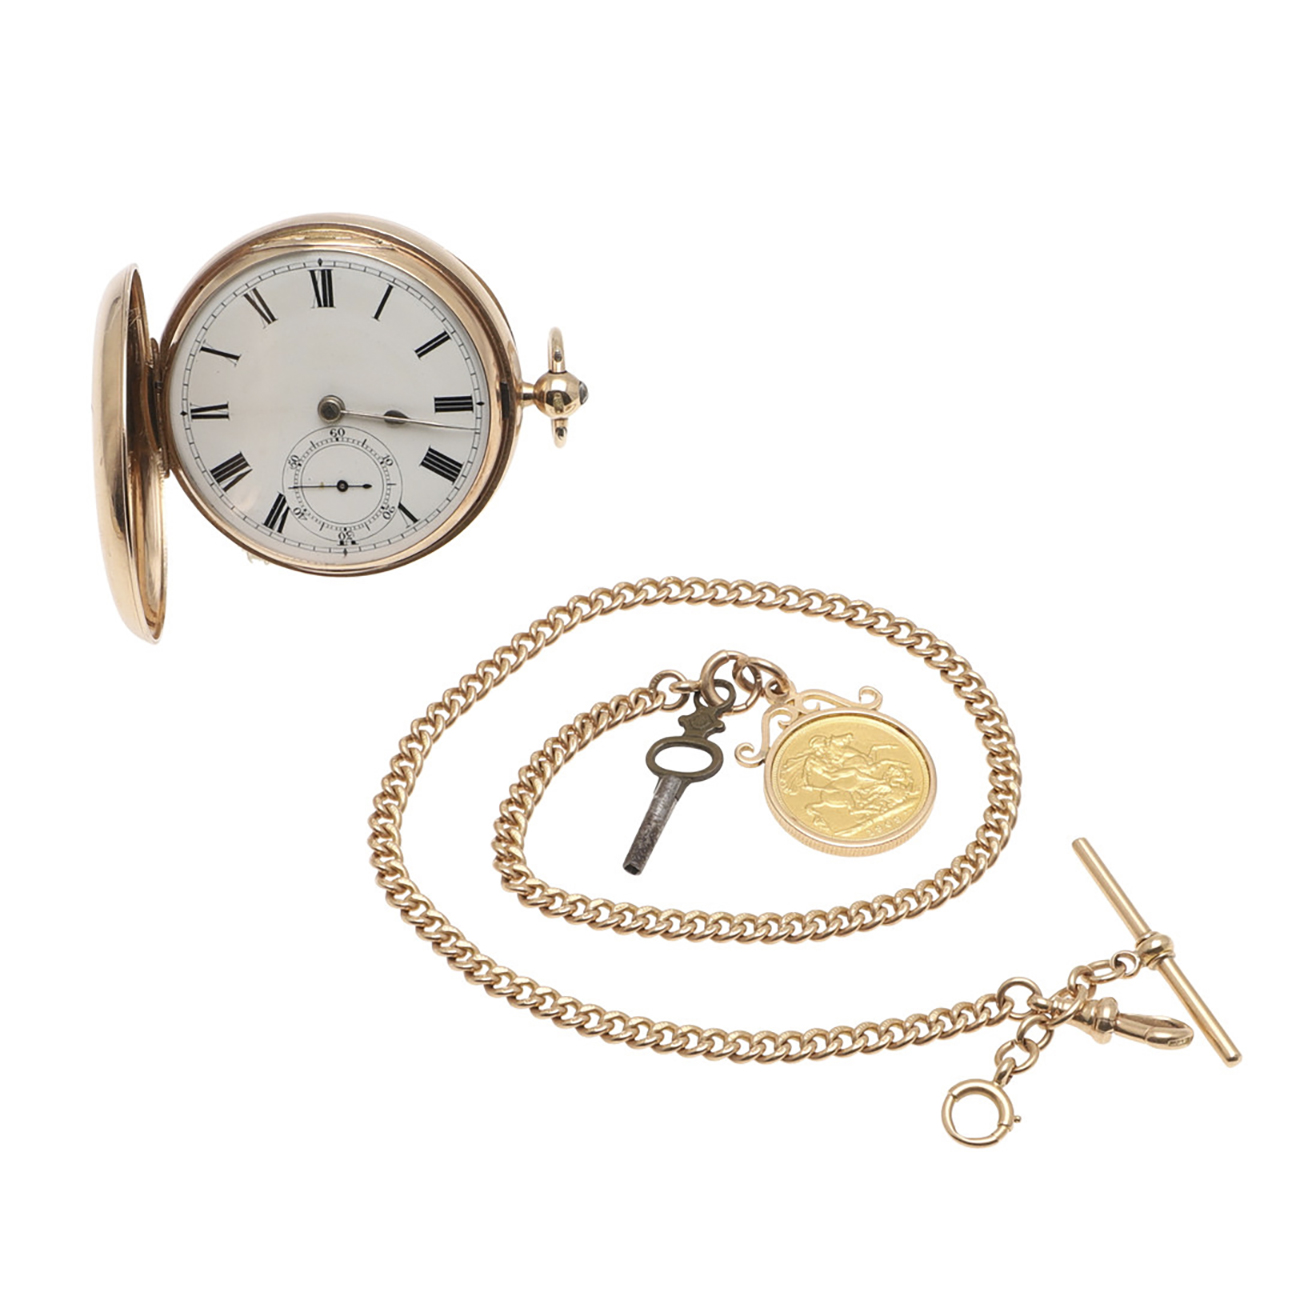 A 9CT GOLD FULL HUNTING CASED POCKET WATCH.